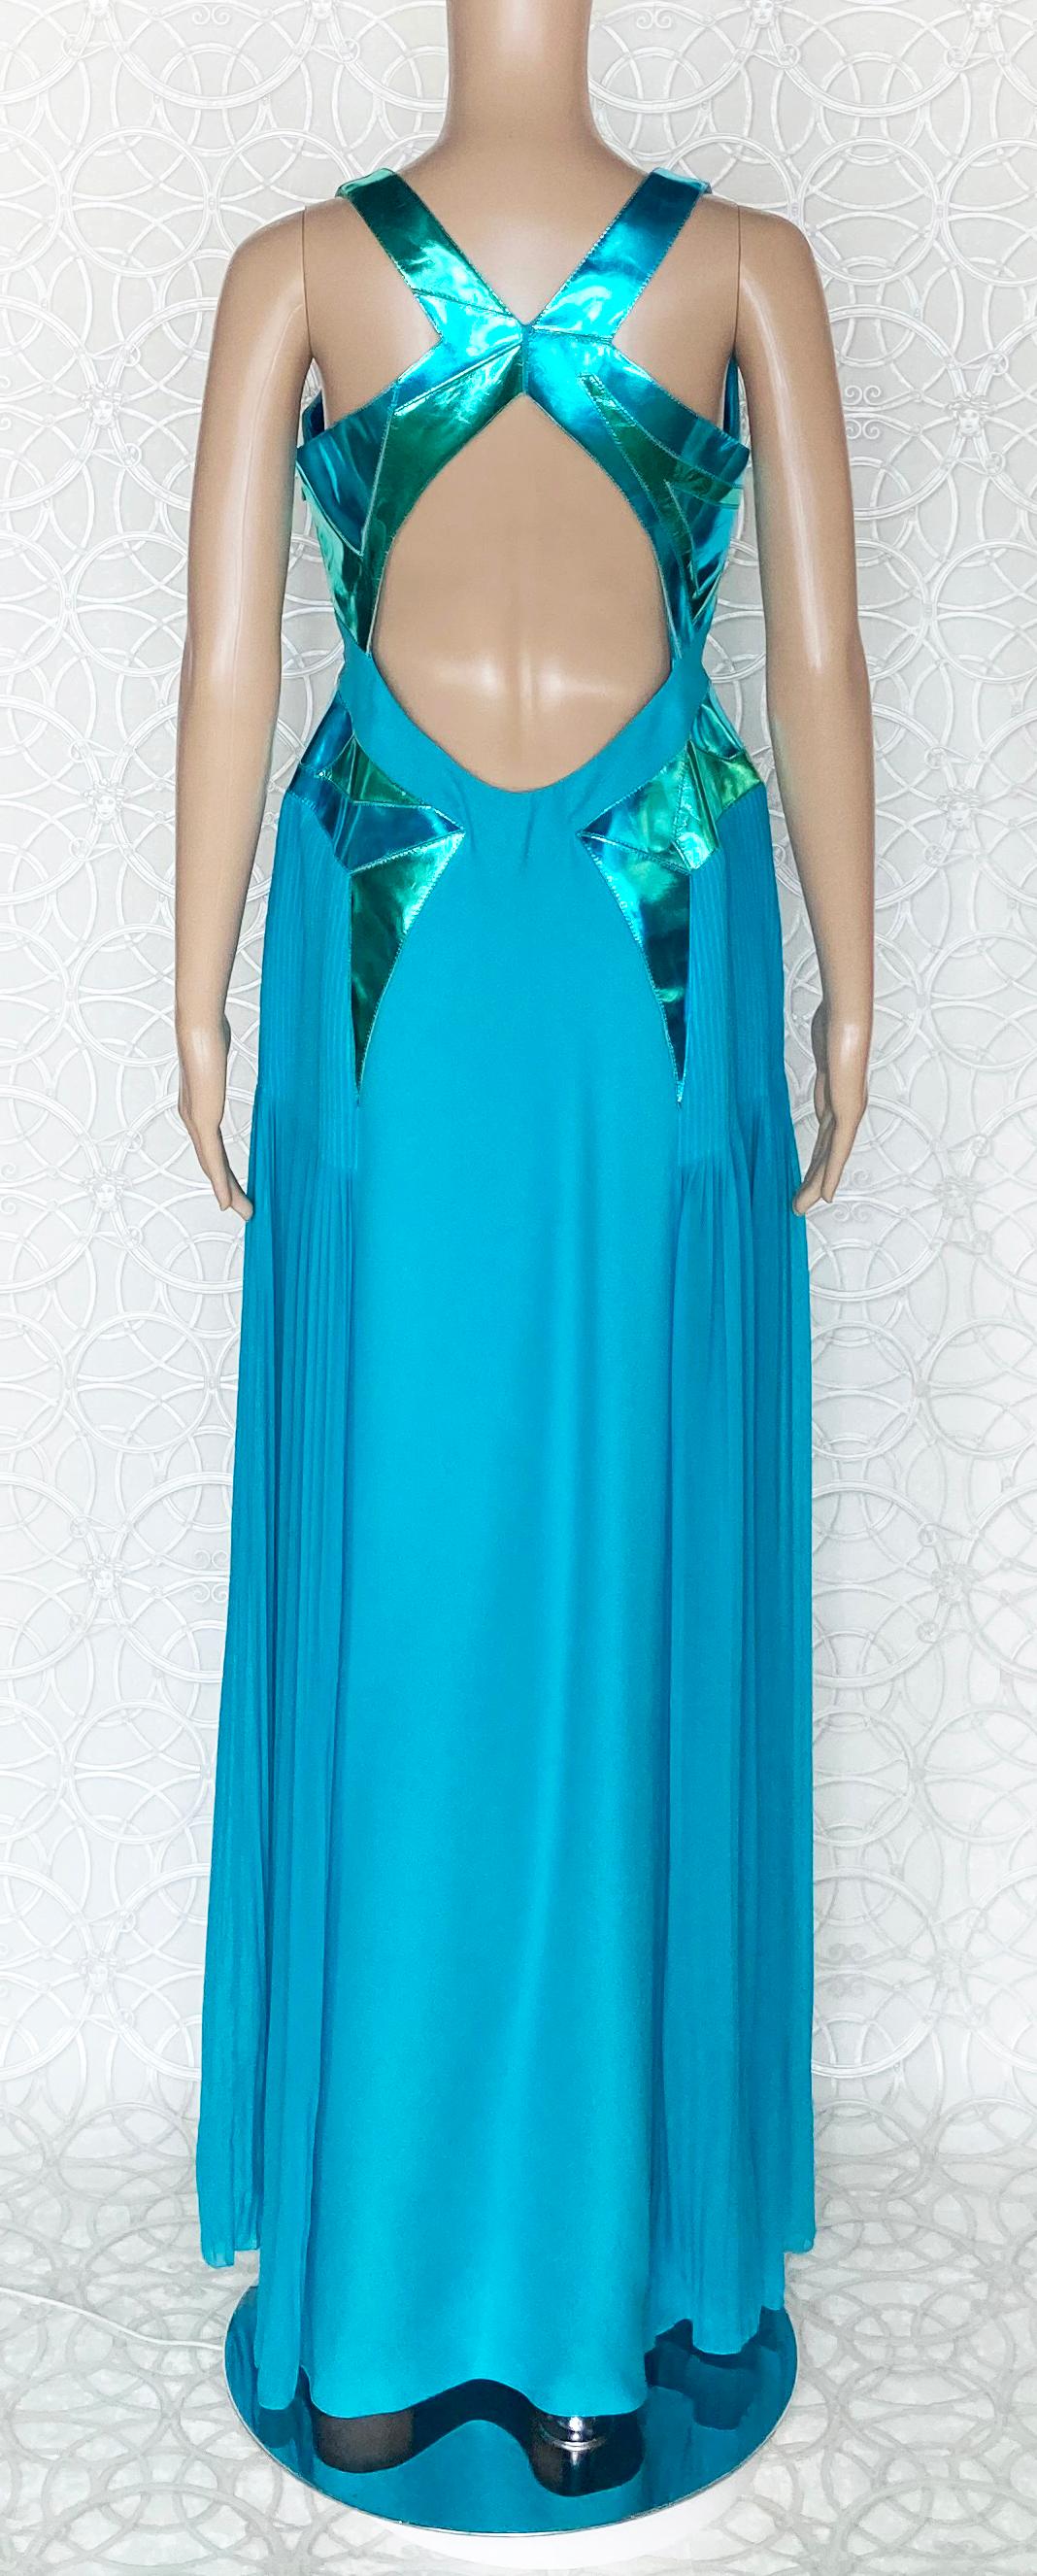 Blue F/W 2010 Look # 38 VERSACE EMBELLISHED GOWN DRESS in BLUE 44 - 8 For Sale